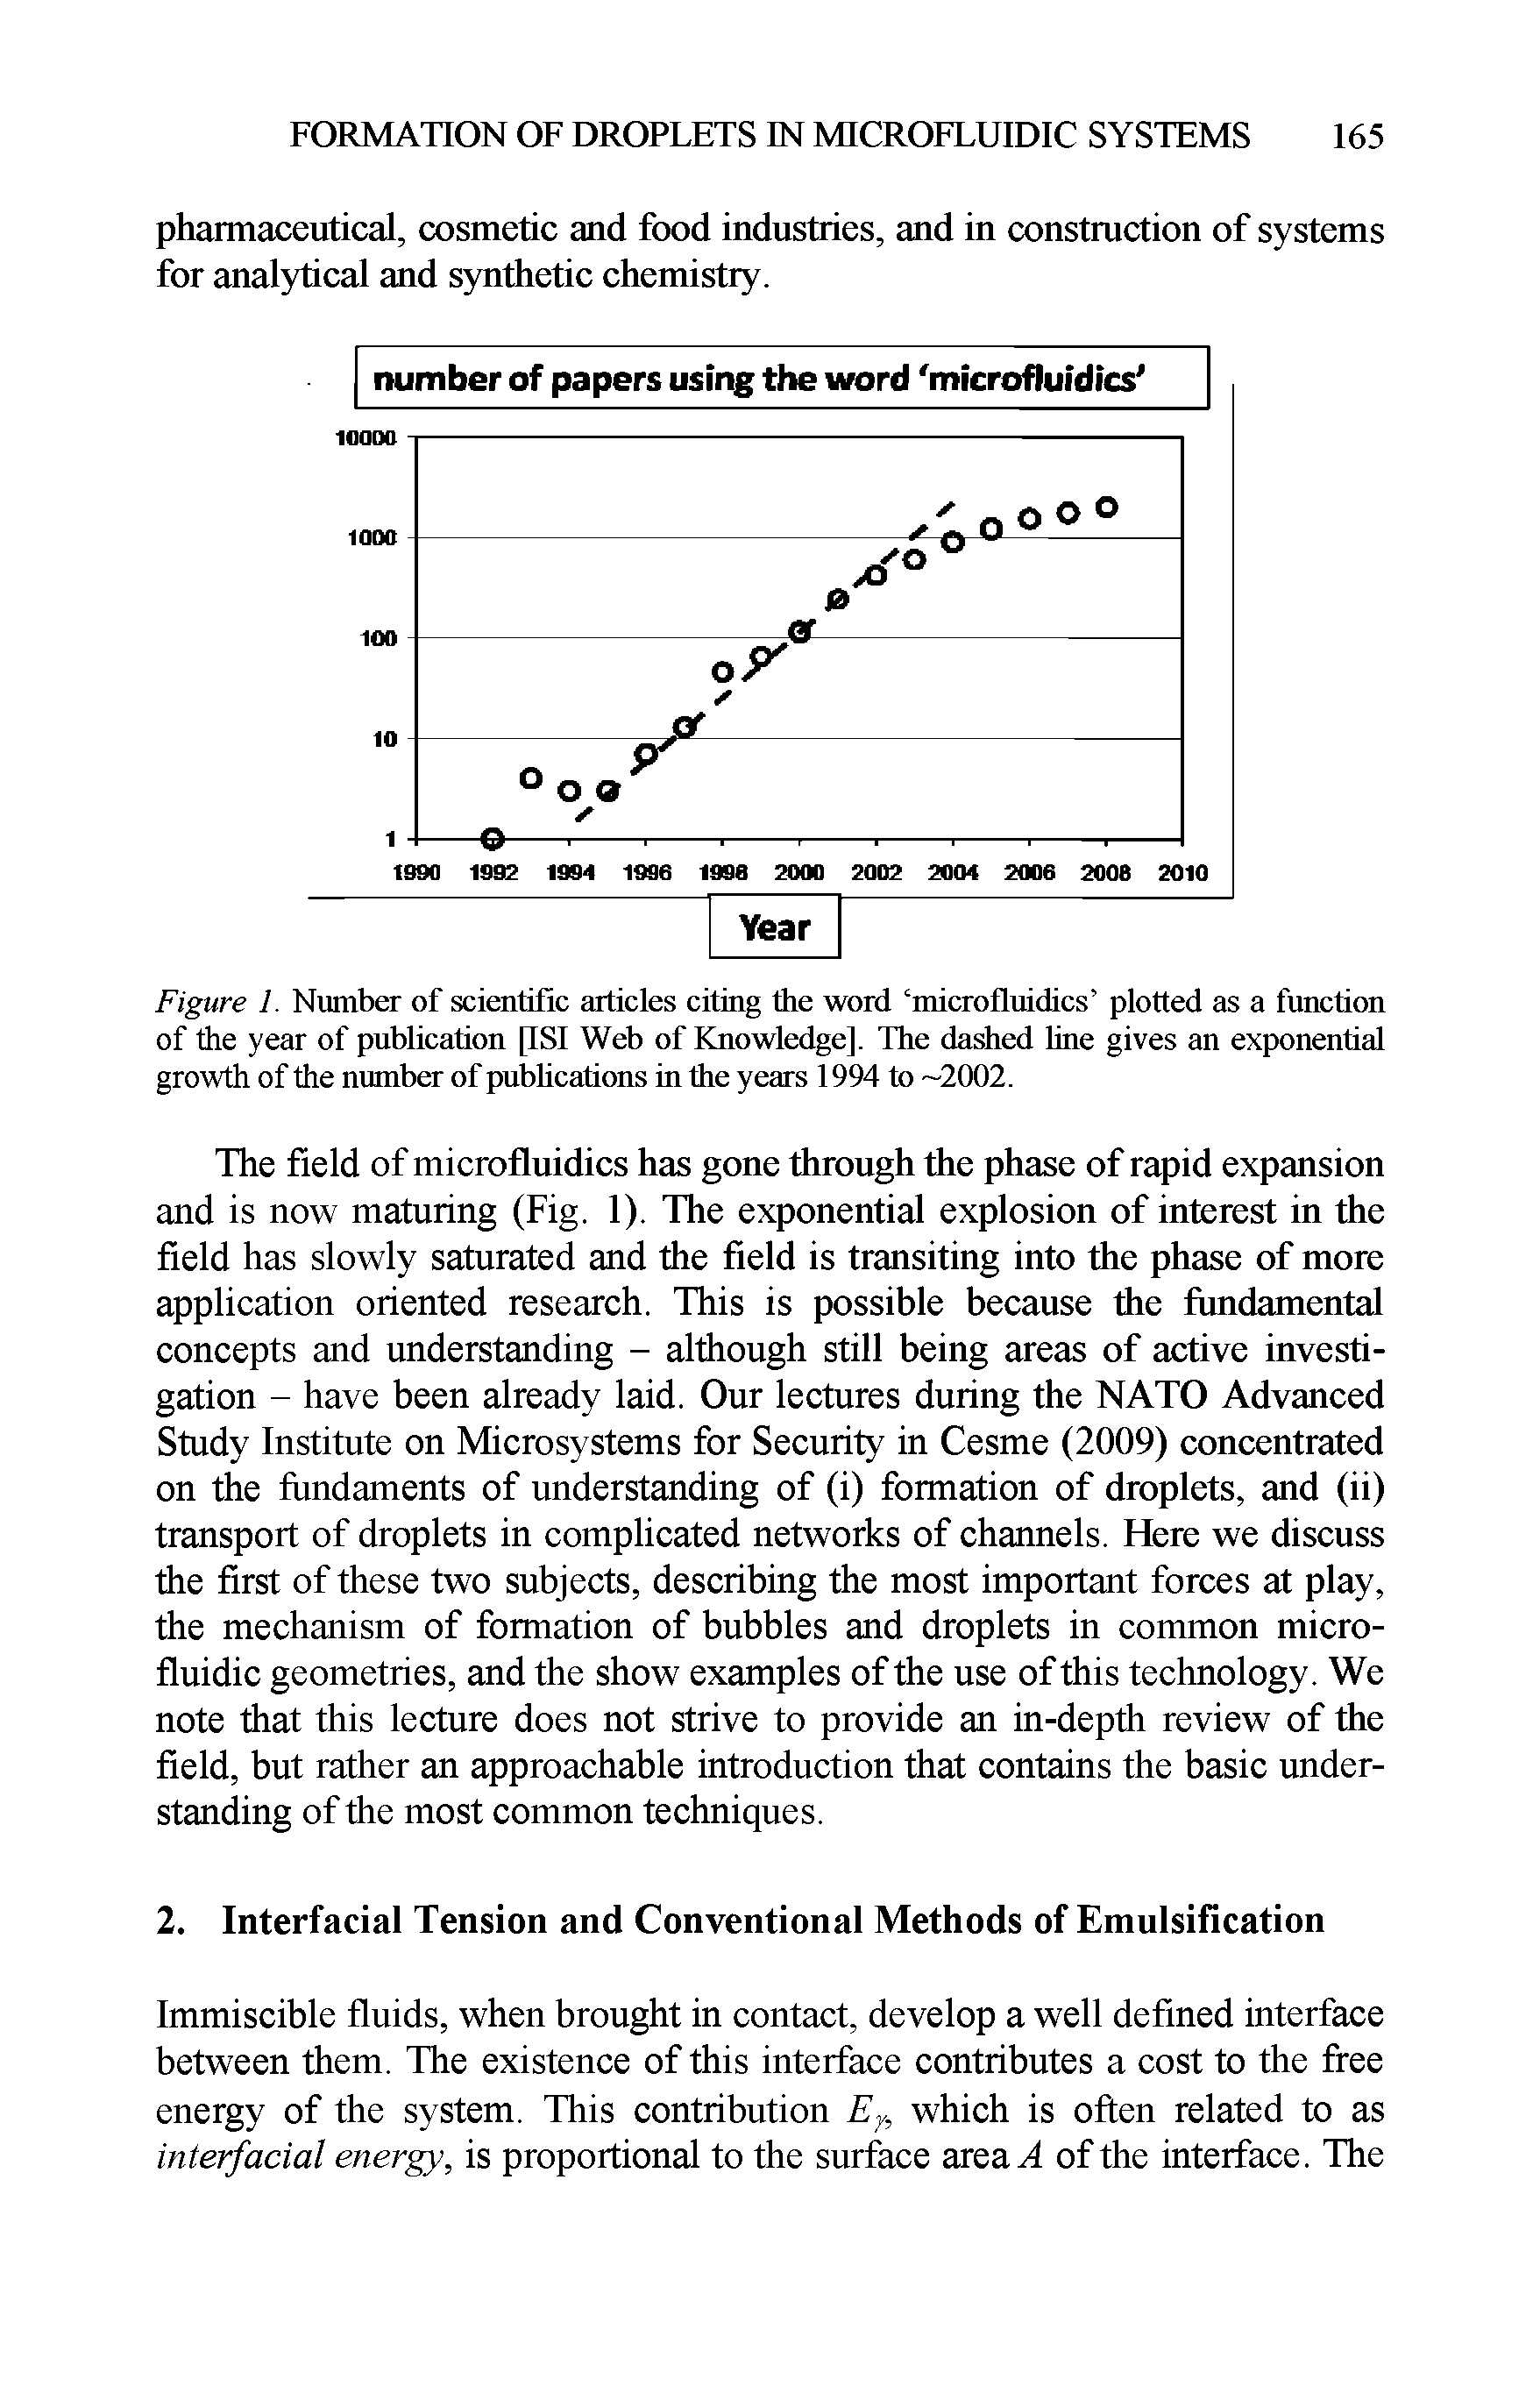 Figure I. Number of scientific articles citing the word microfluidics plotted as a function of the year of publication [ISl Web of Knowledge], The dashed line gives an exponential growth of the number of pubhcations in the years 1994 to —2002.